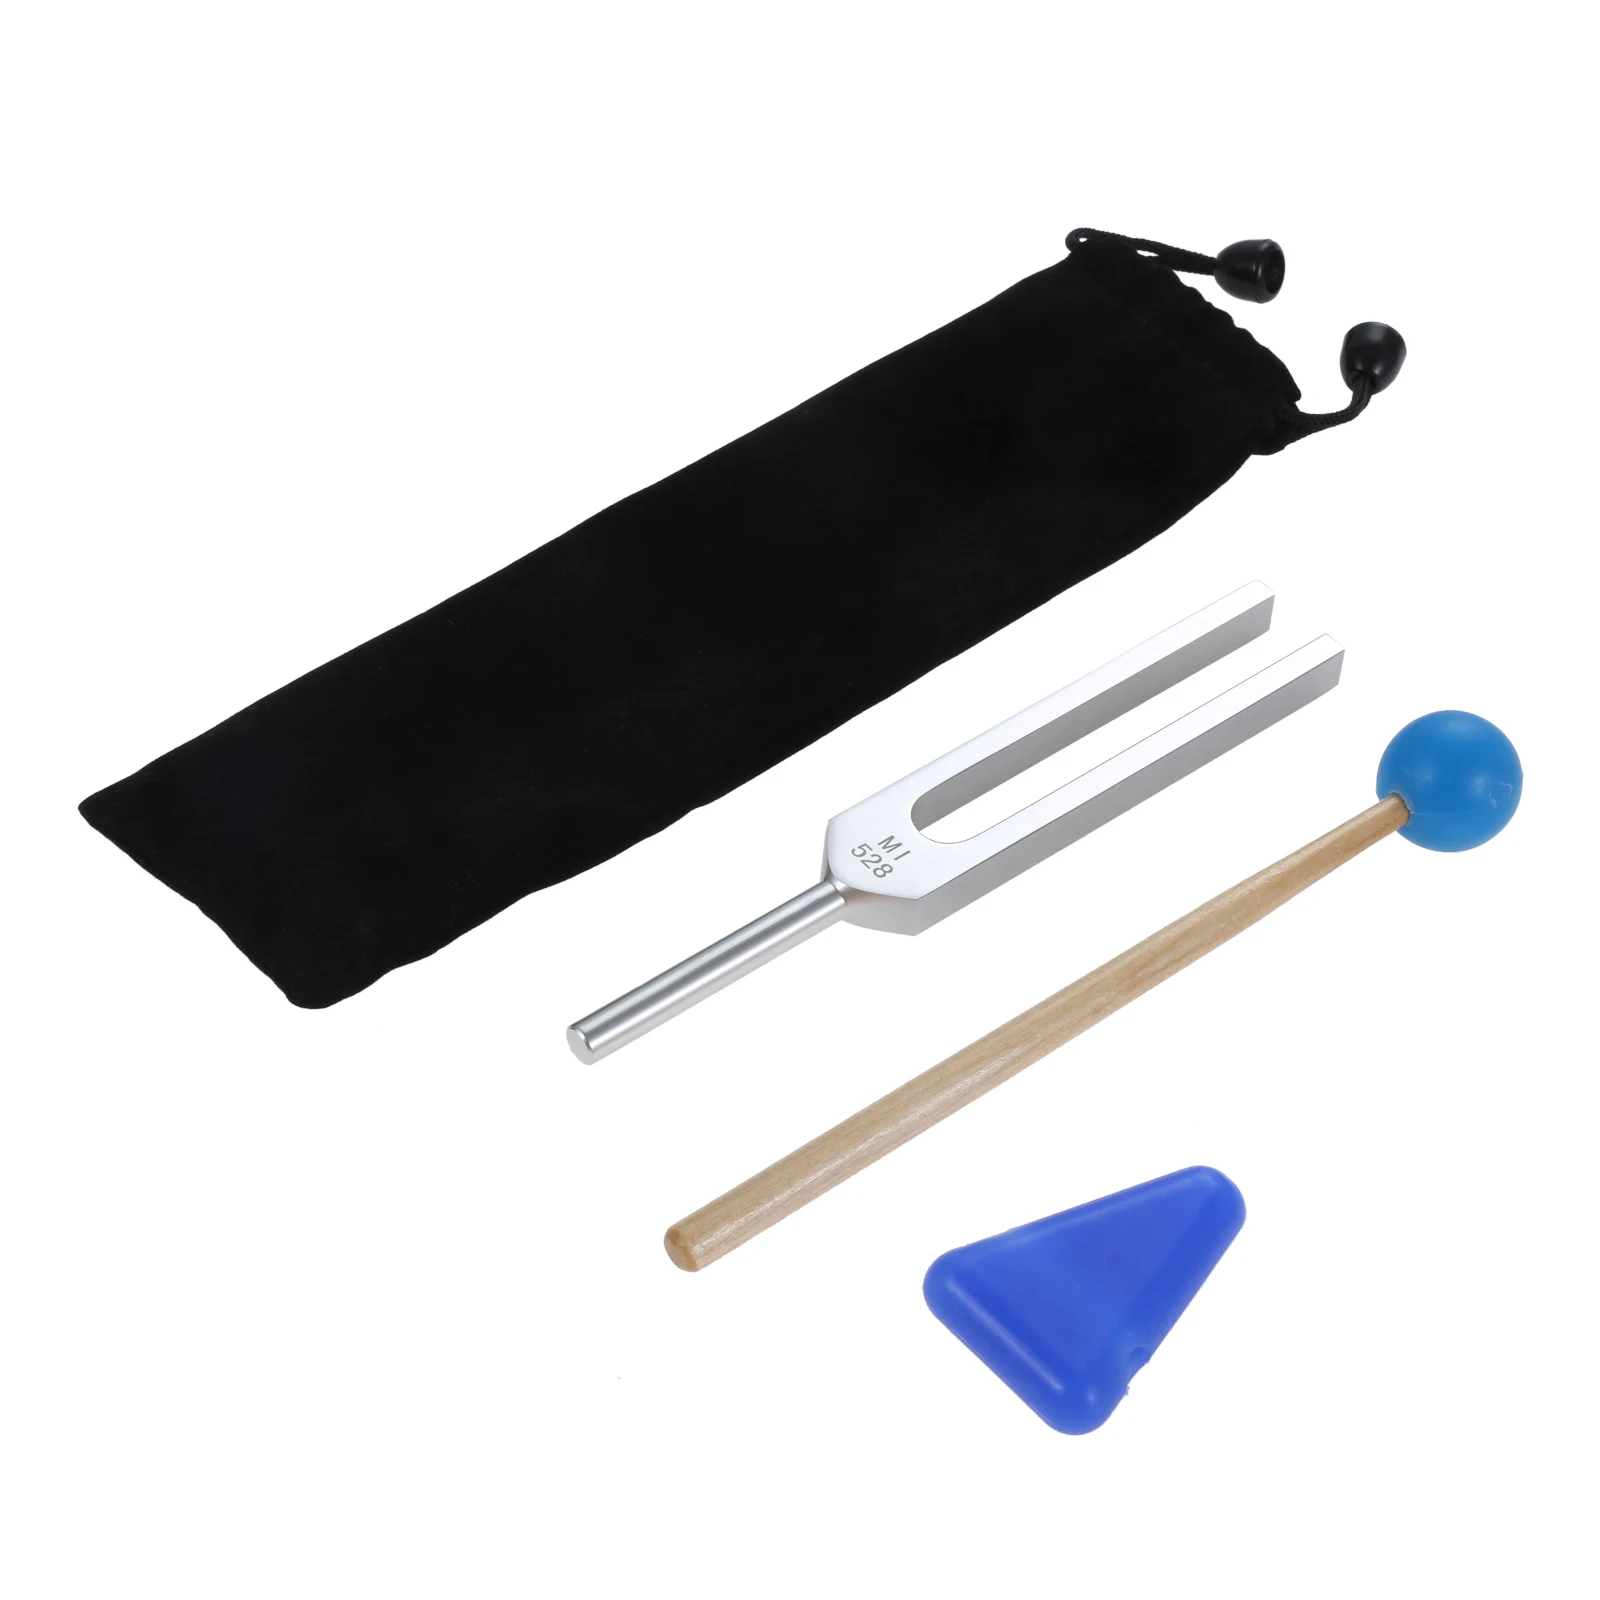  Tuning Fork, 528 Hz Tuning Fork with Silicone Hammer